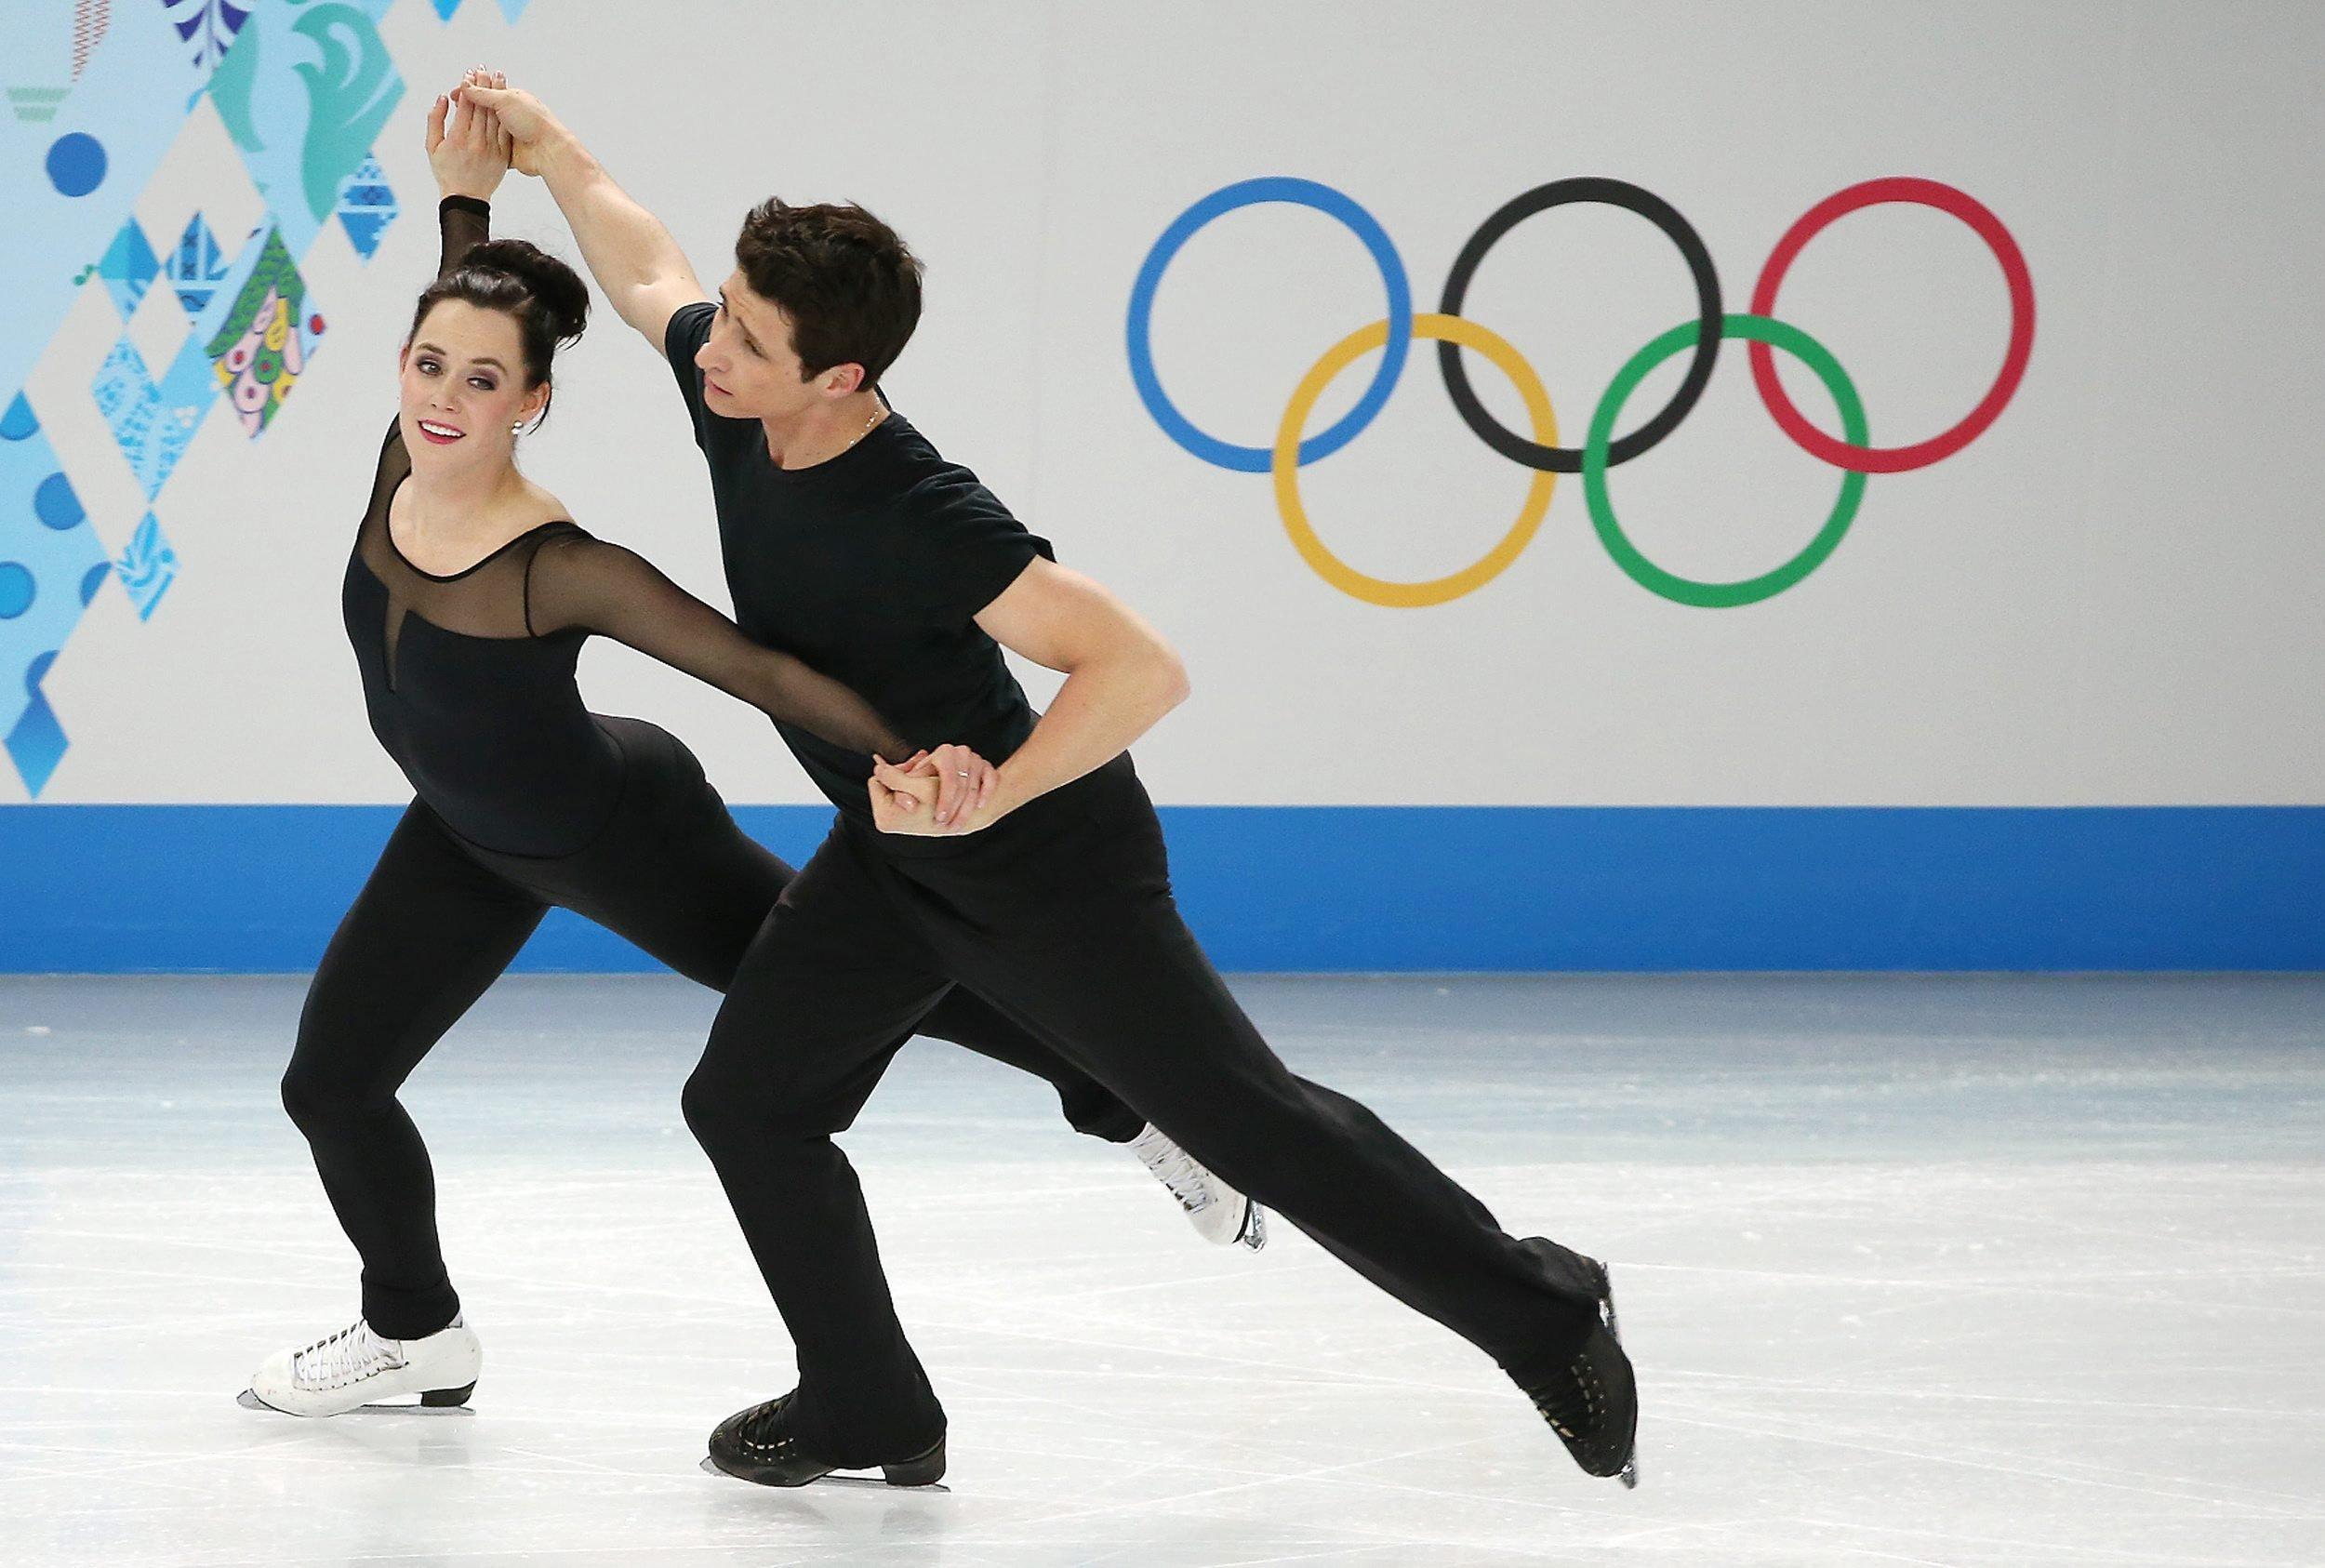 Sochi Olympics Team Figure Skating: What You Need to Know